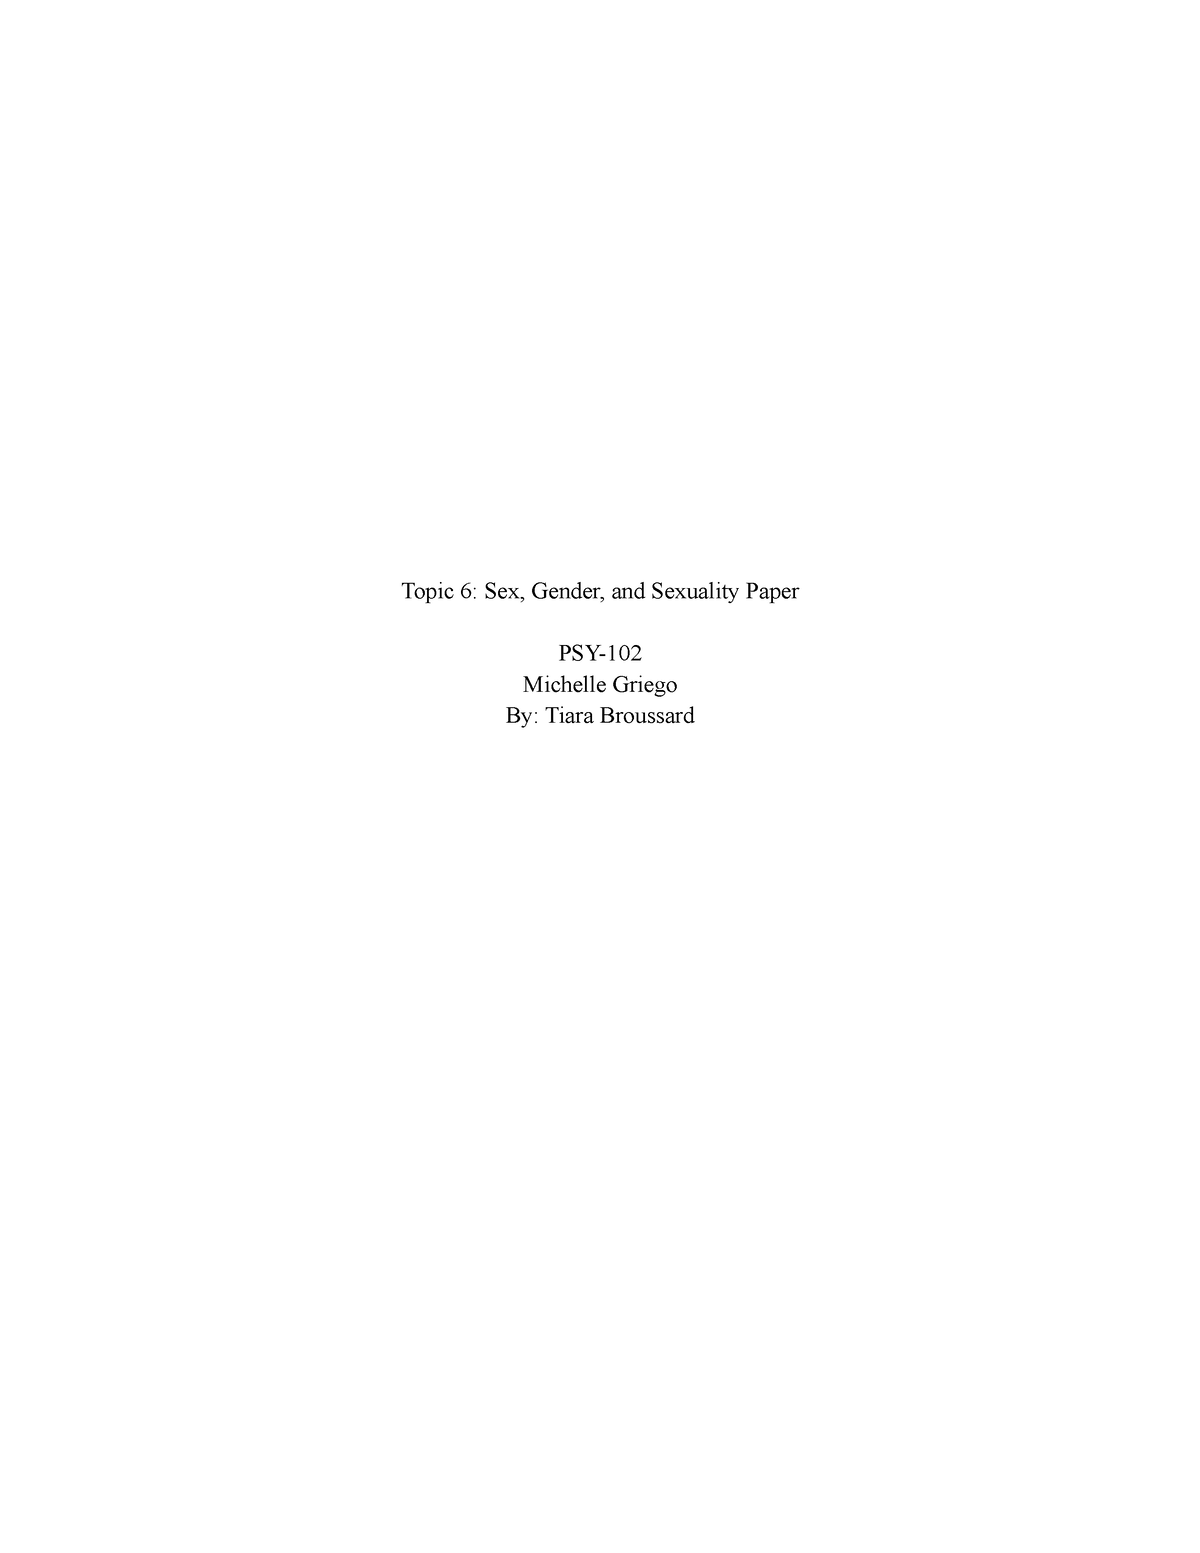 Topic 6 Topic 6 Sex Gender And Sexuality Paper Psy Michelle Griego By Tiara Broussard We 5482